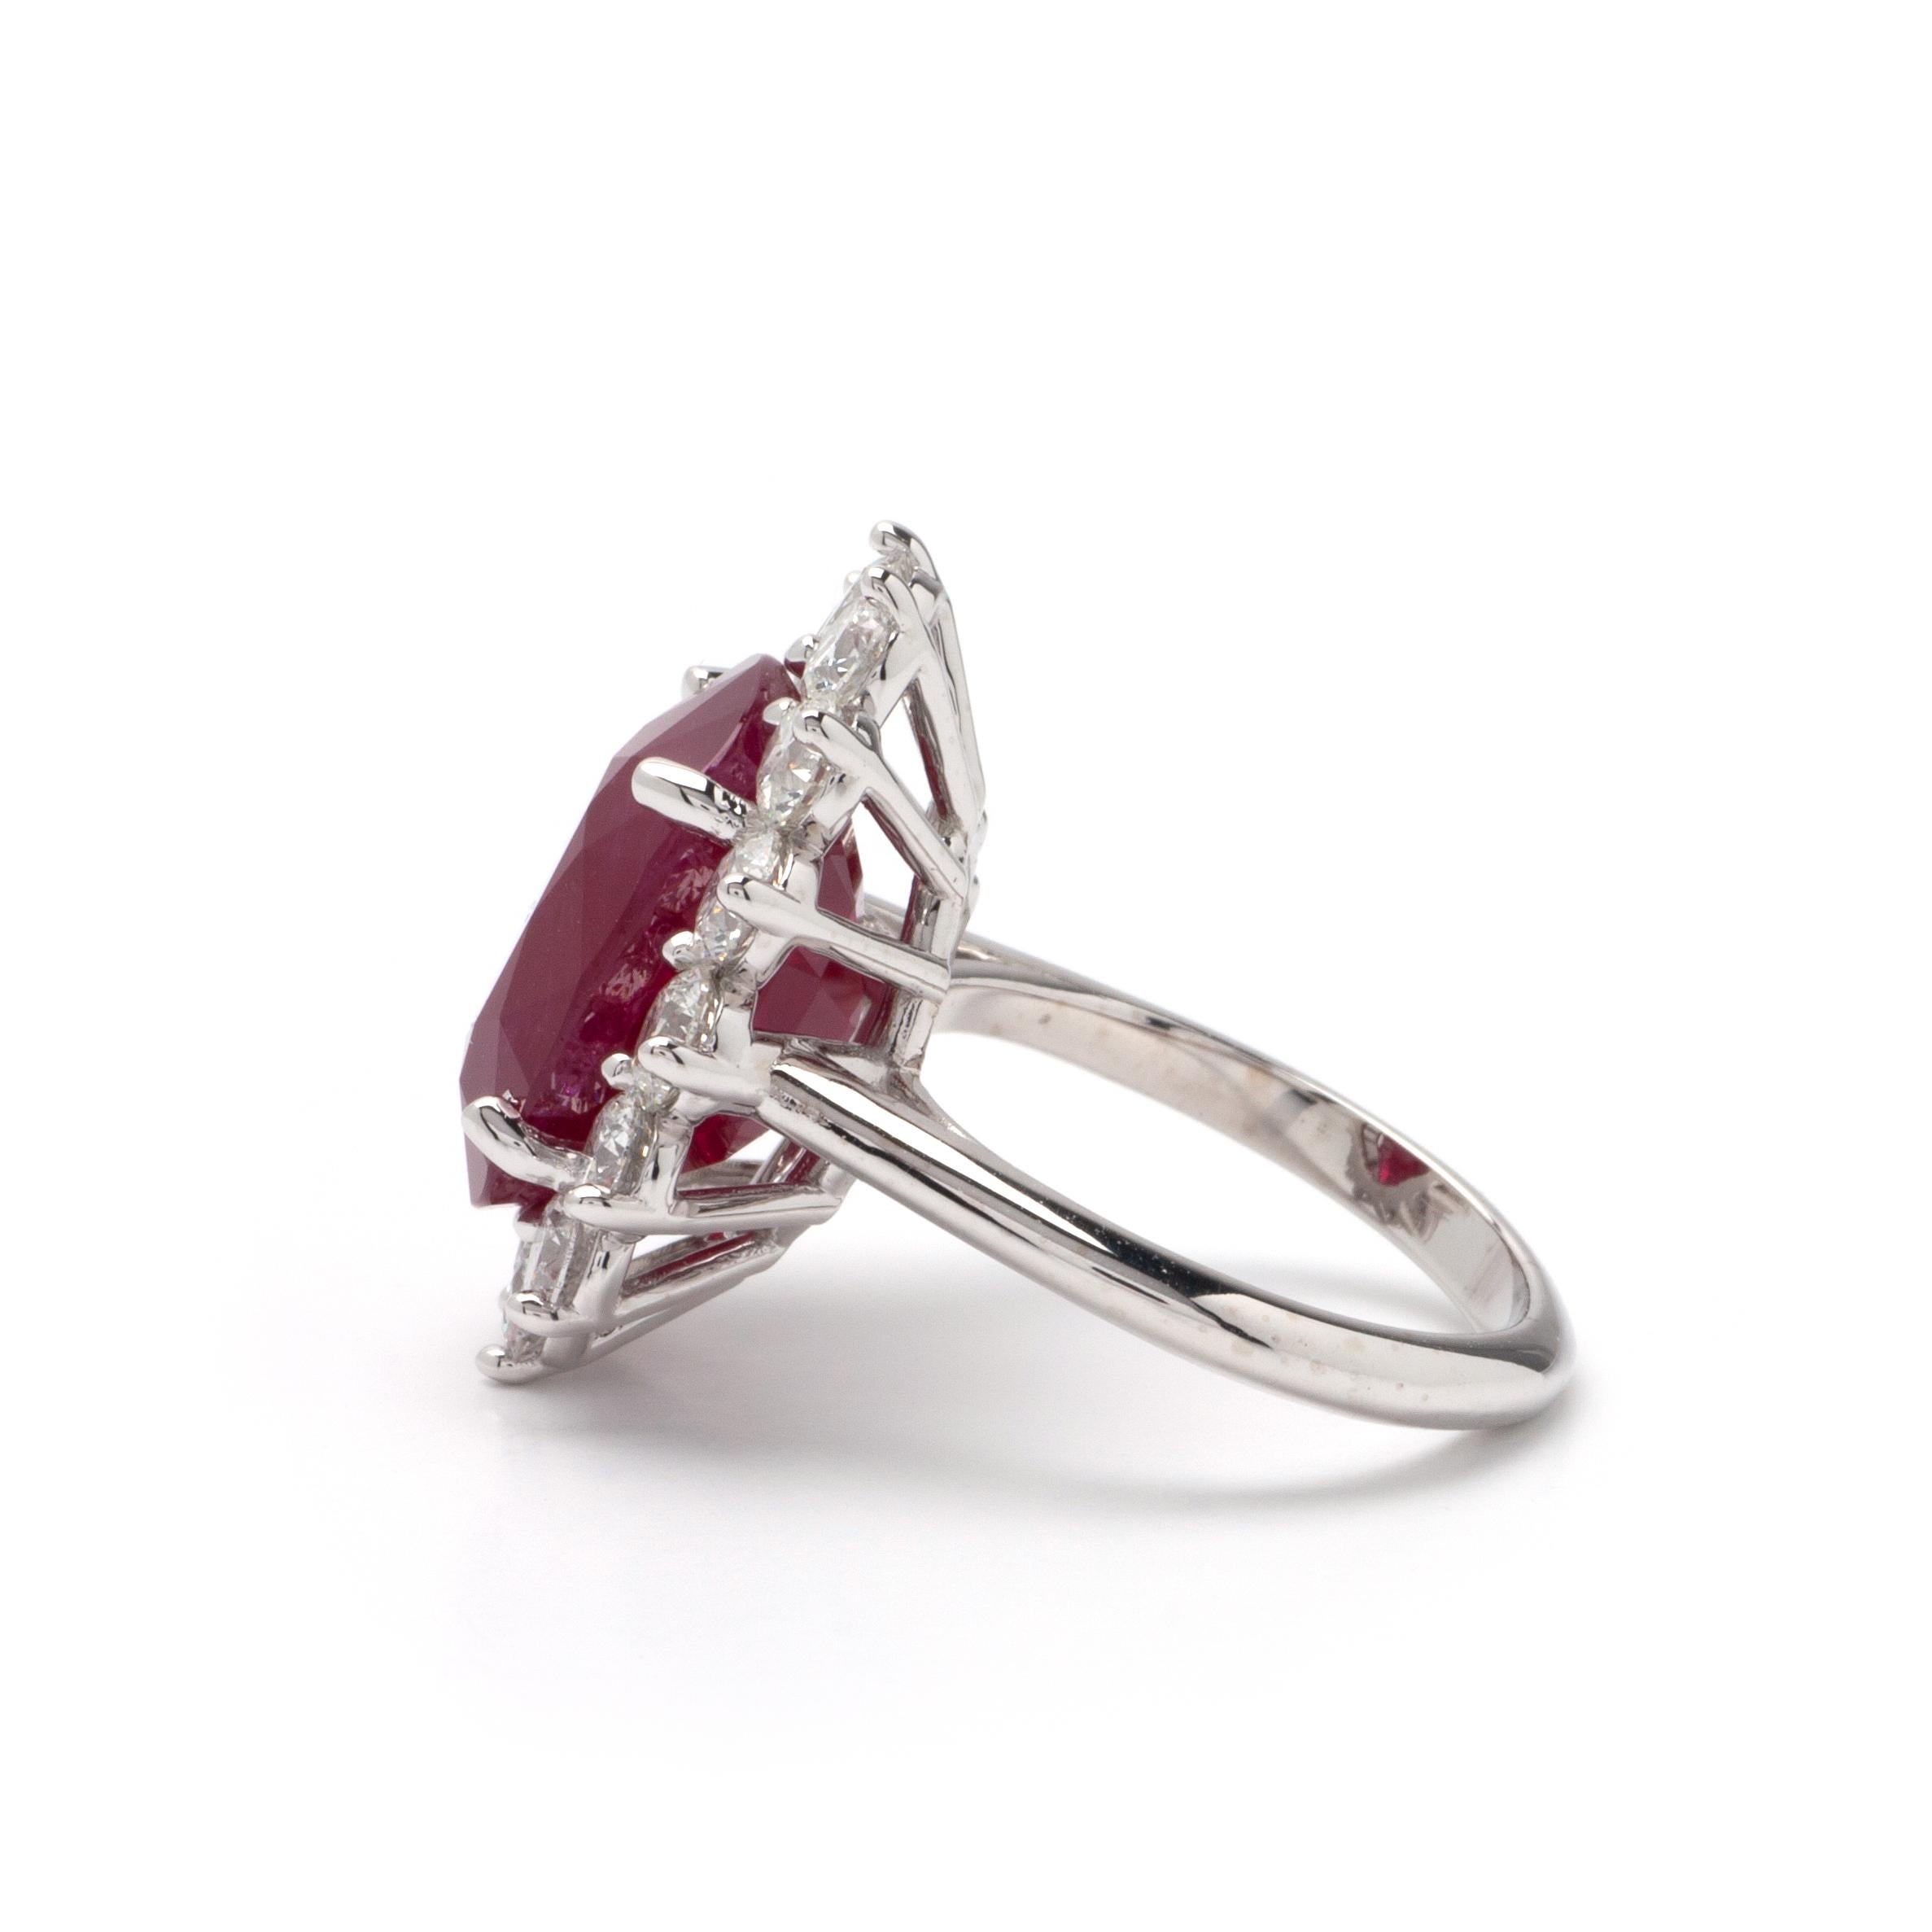 This ring features a halo design of G color, VS1 clarity, and 2.69ct Round side diamonds set in 14K white gold. The center gemstone is an 11.94ct oval ruby stone measuring 14.93 x 11.18 x 8.09mm. Finger size 6 1/4 with a free resizing.